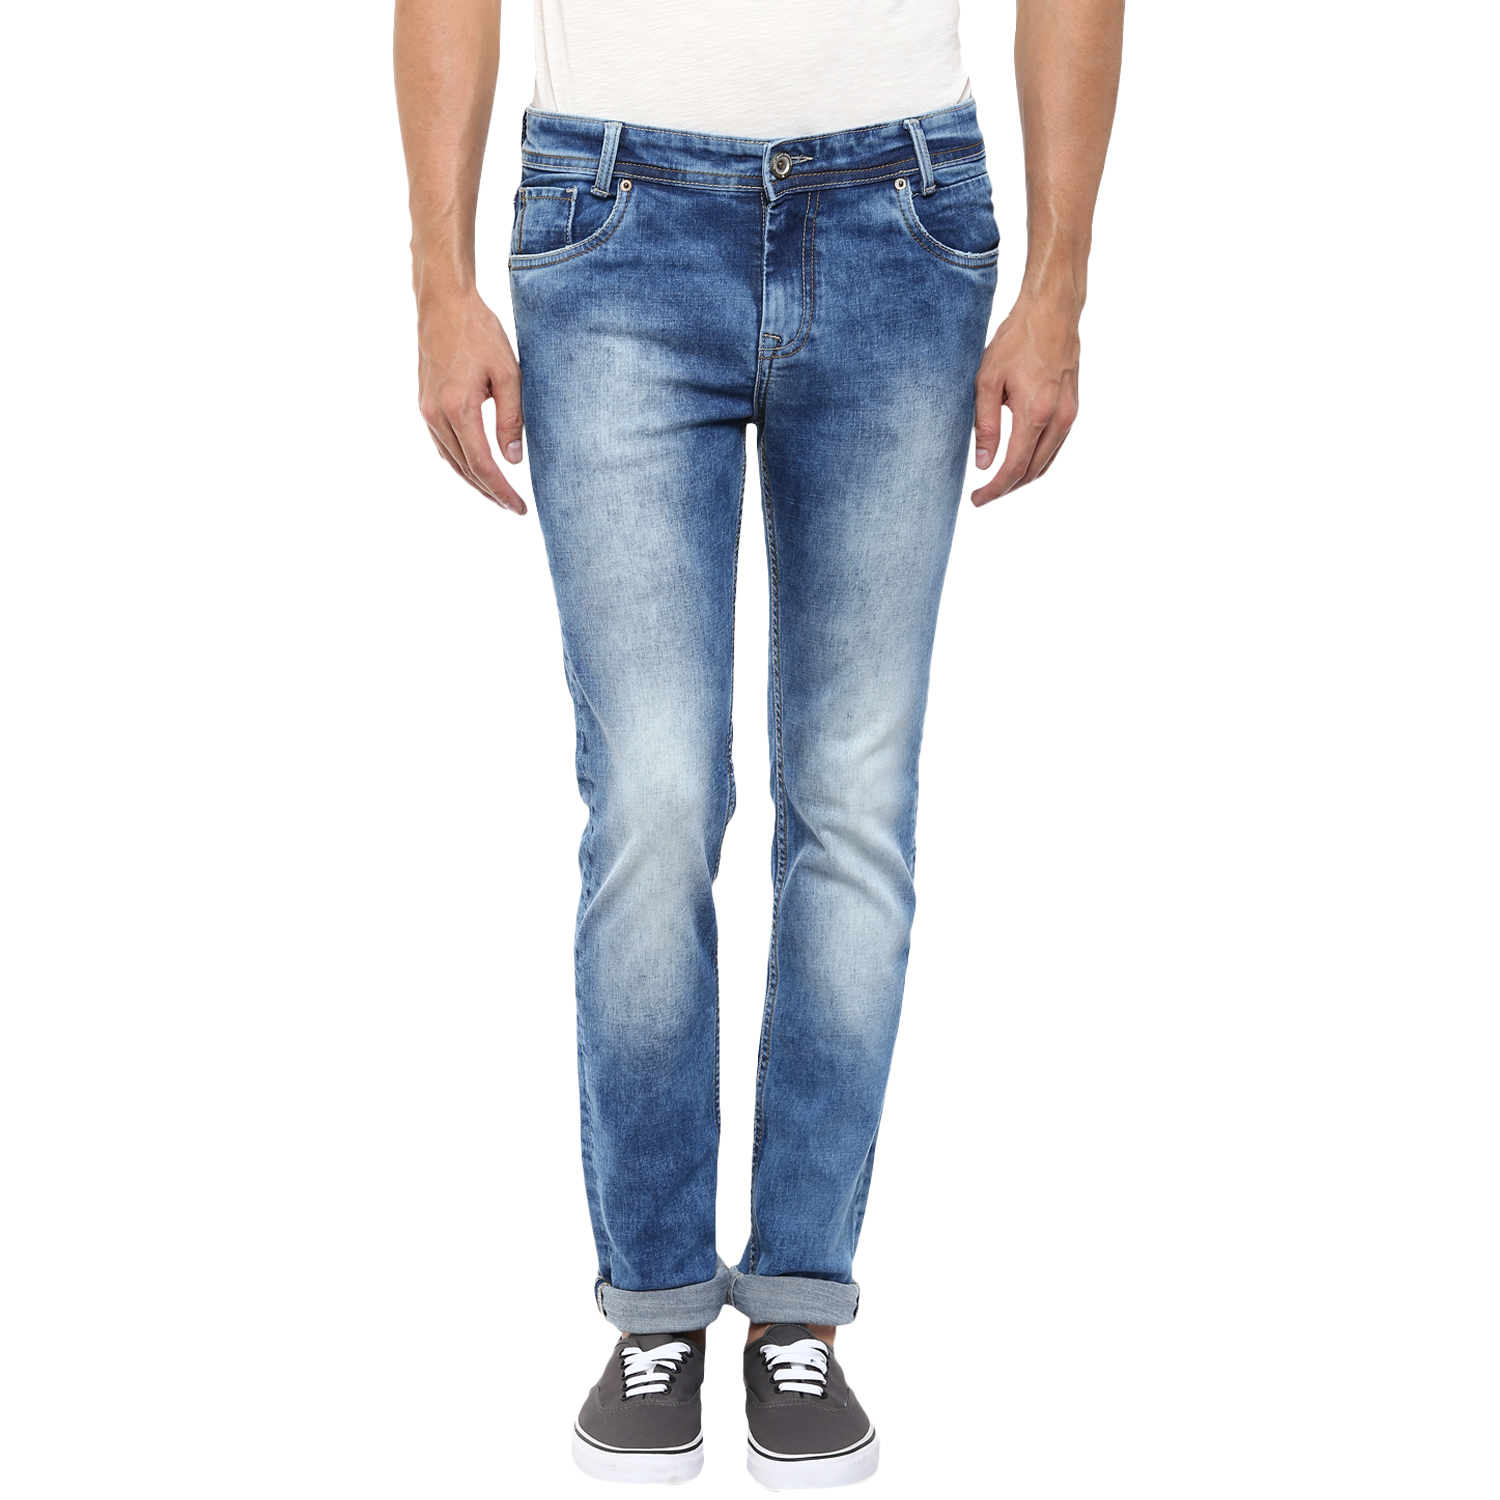 Buy Mufti Men's Blue Straight Fit Jeans Online @ ₹1889 from ShopClues